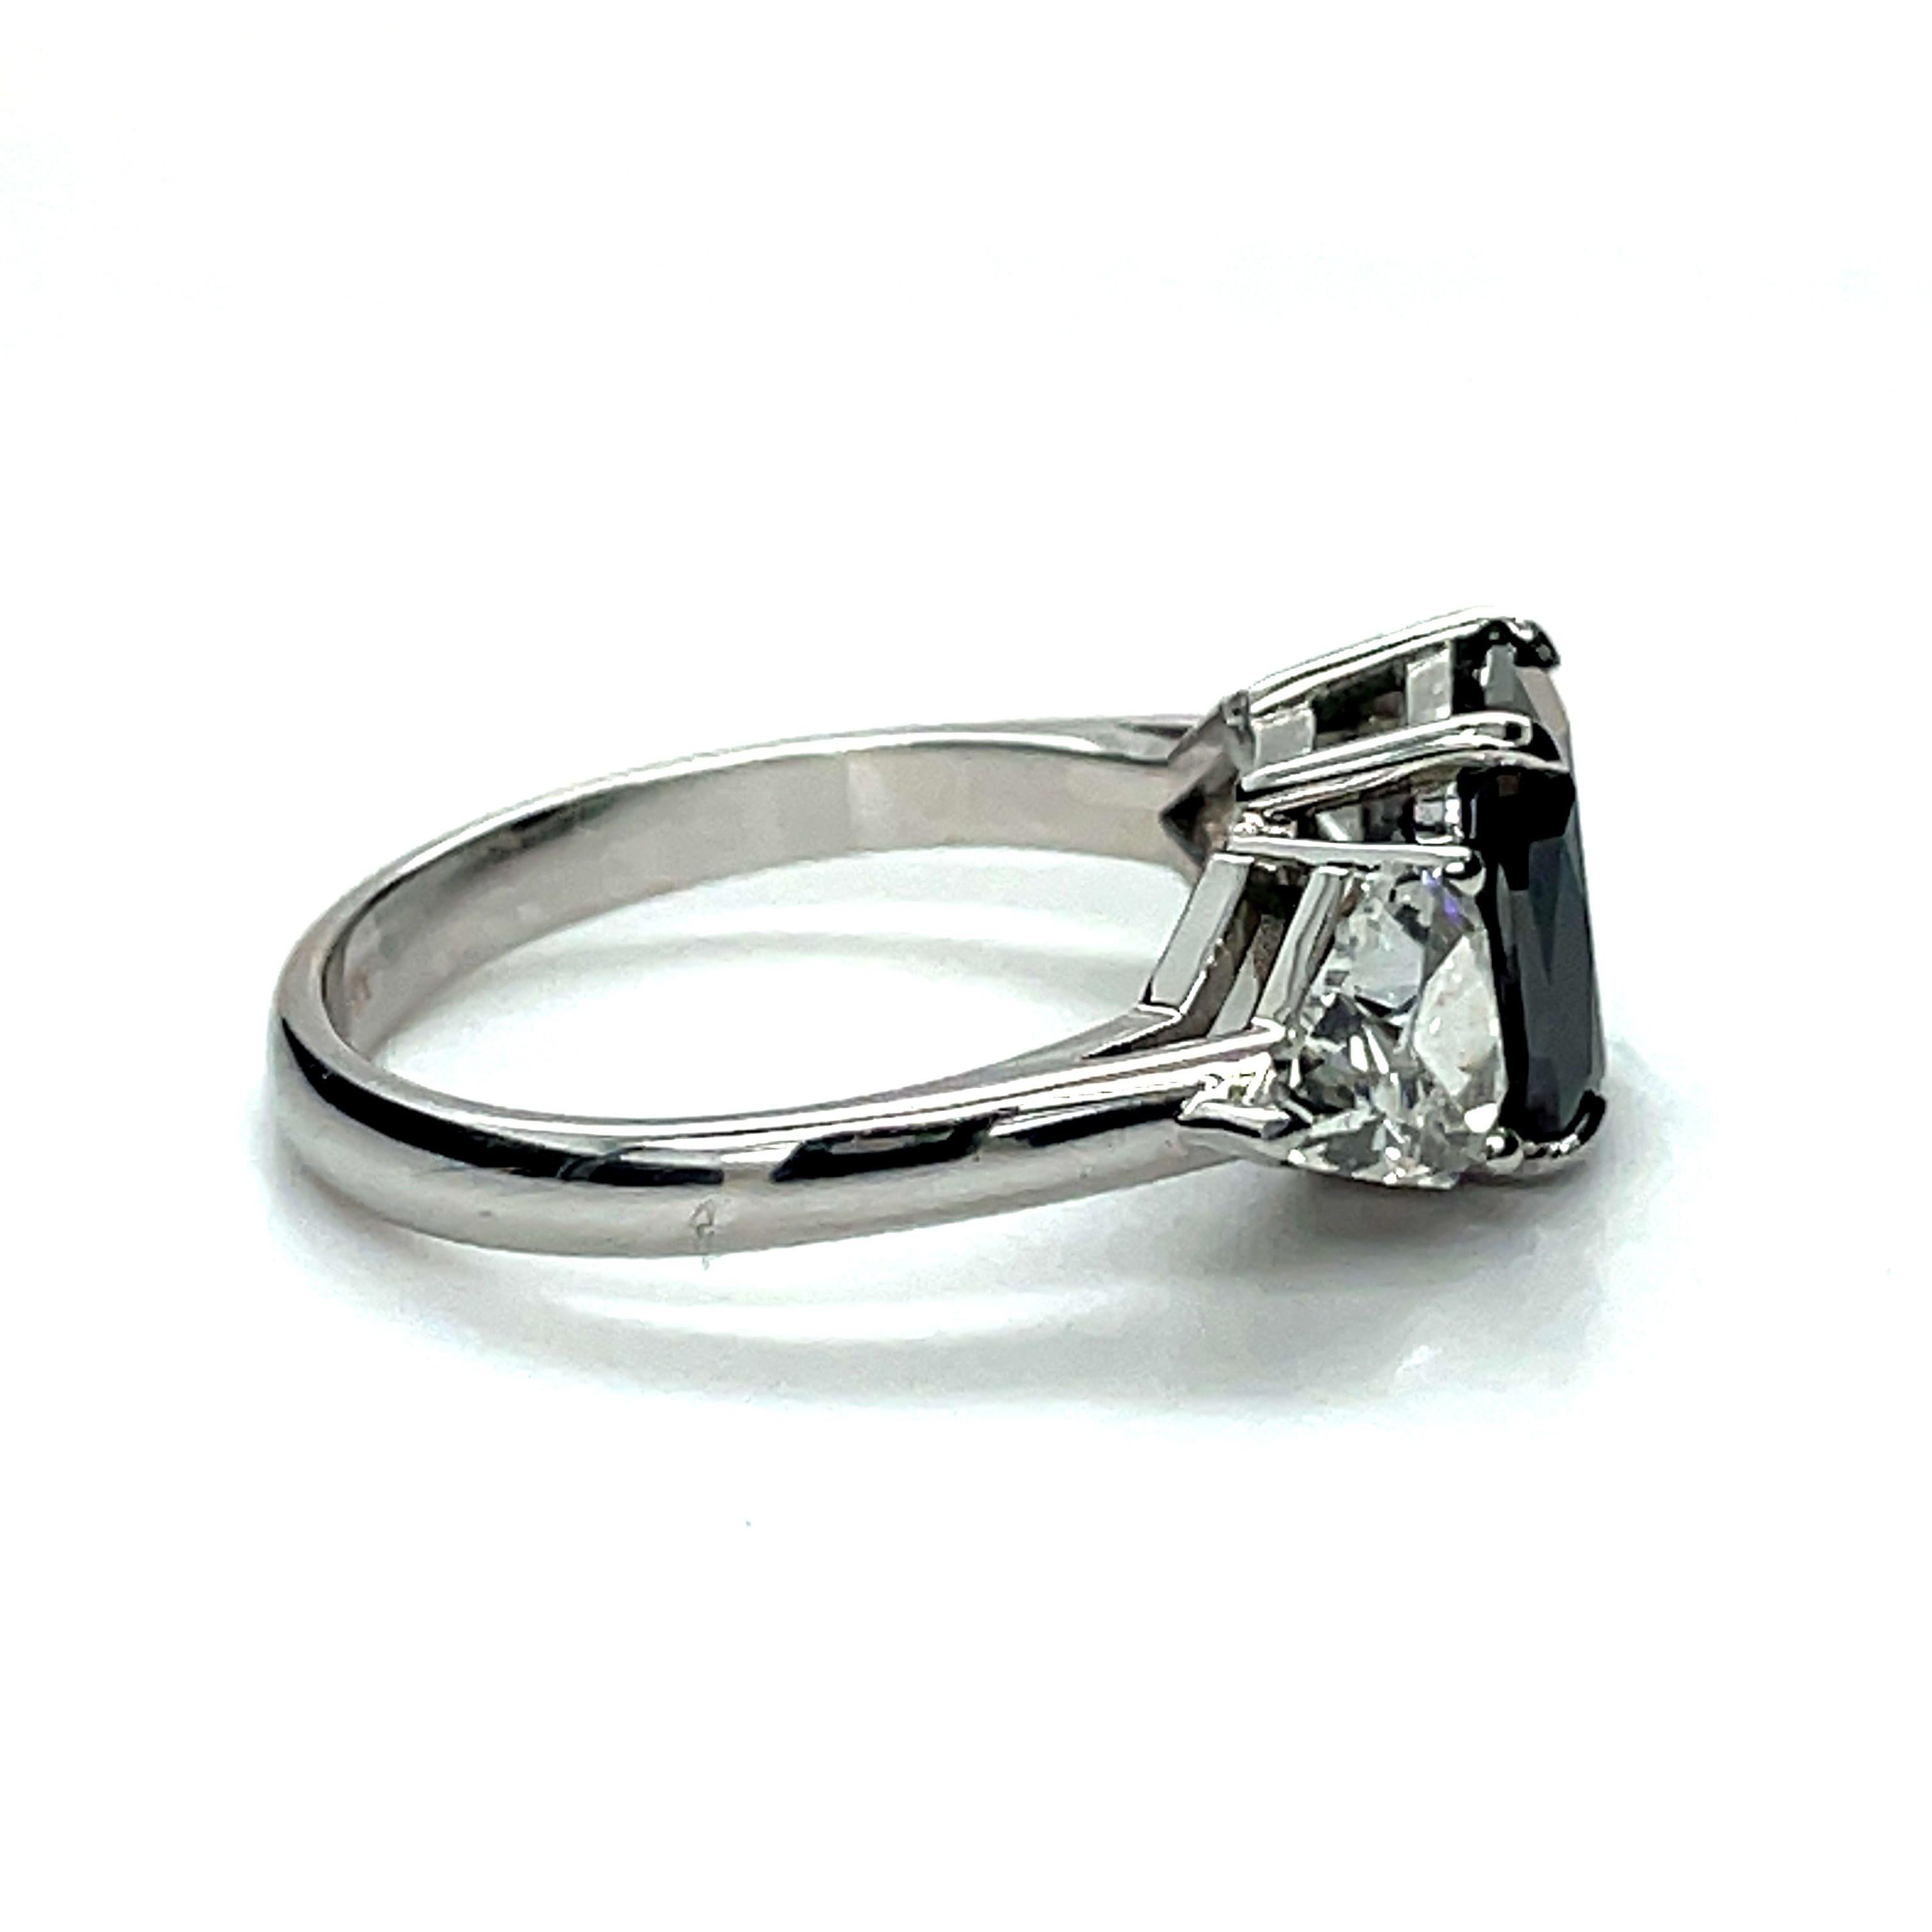  Engagment ring, 2.35ct Black Diamond Trillions cut side Diamonds 18K white gold In Excellent Condition For Sale In Ramat Gan, IL